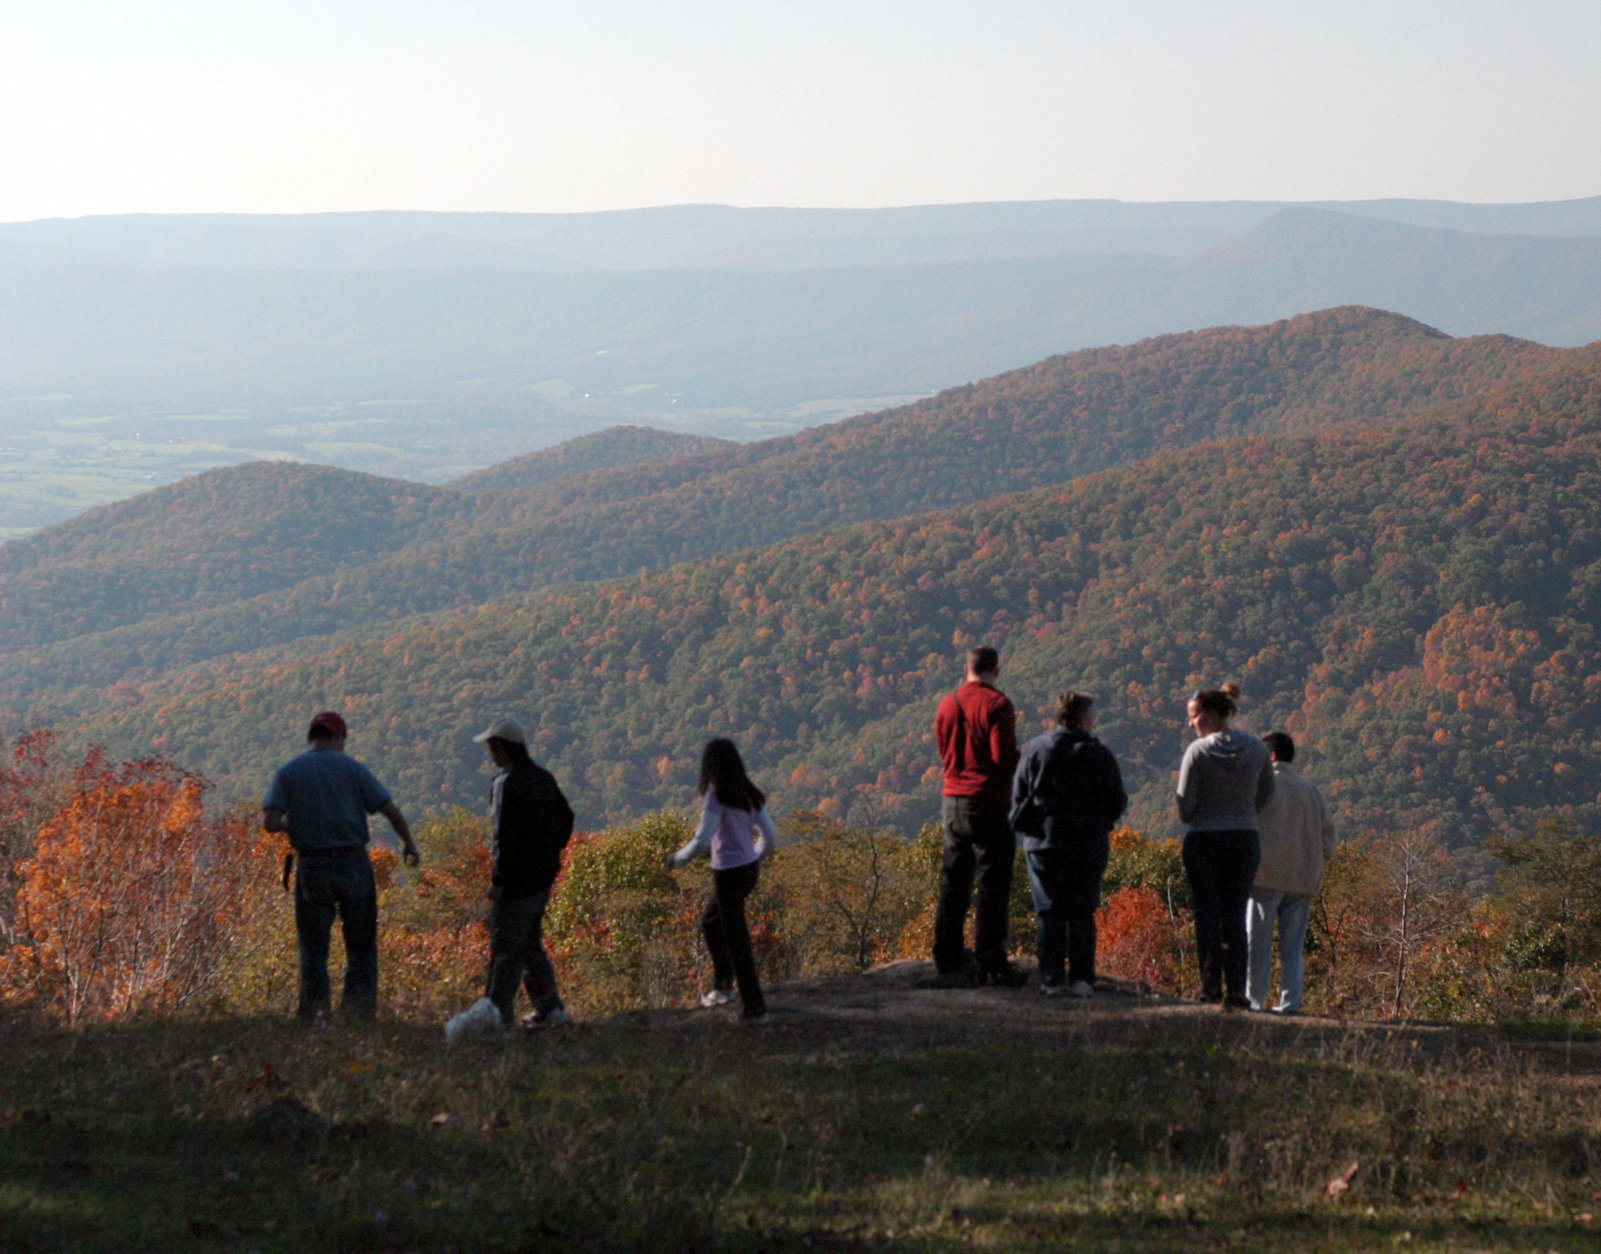 Viewers look out on autumn foliage from an overlook in Shenandoah National Park south of Front Royal. Va., Saturday, Oct. 21, 2006. (AP Photo/Robert Meyers)